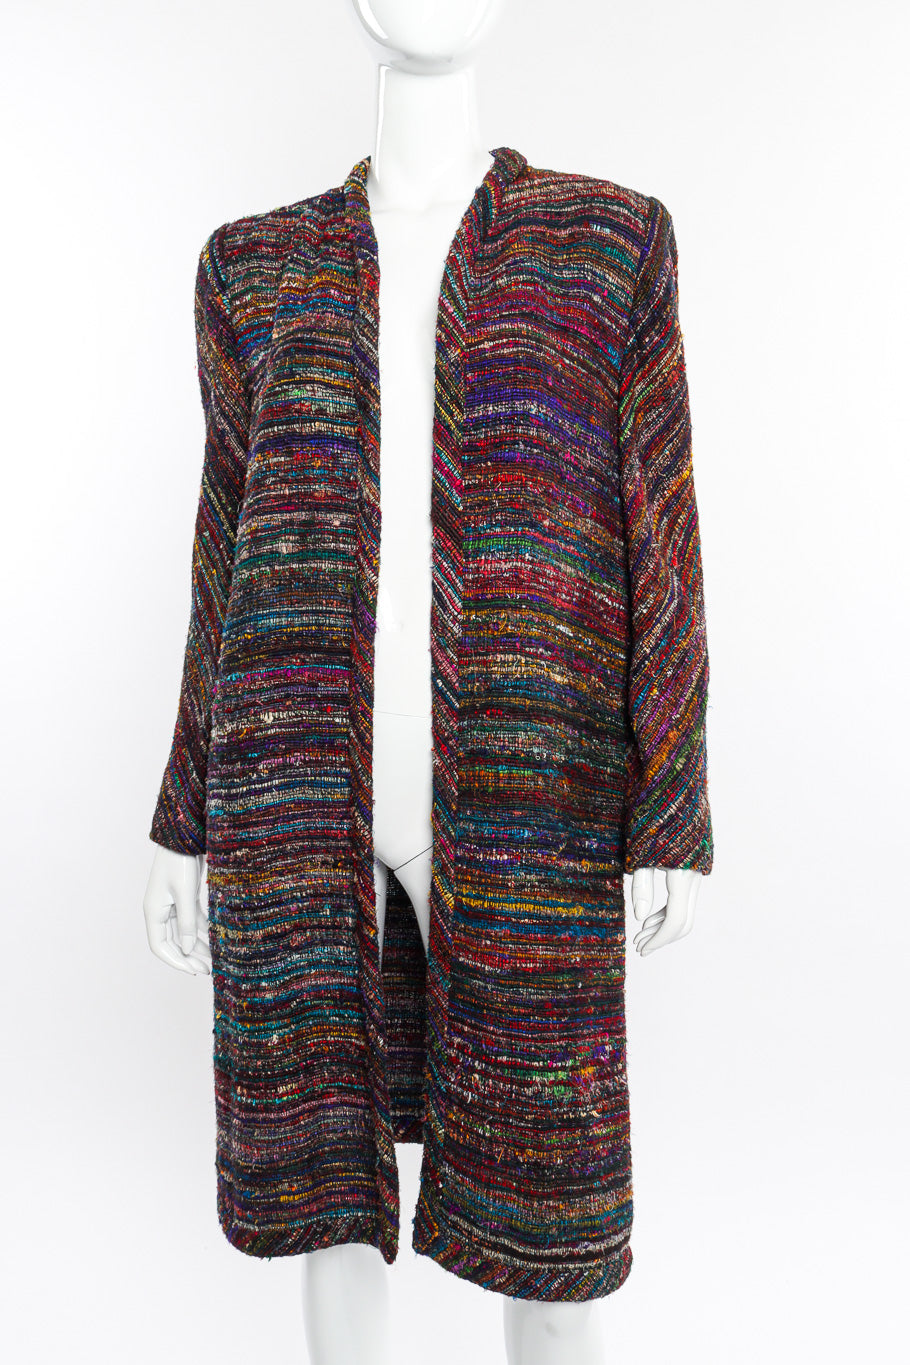 Woven Stripe Duster Coat by Pauline Trigere on mannequin front angled close @recessla